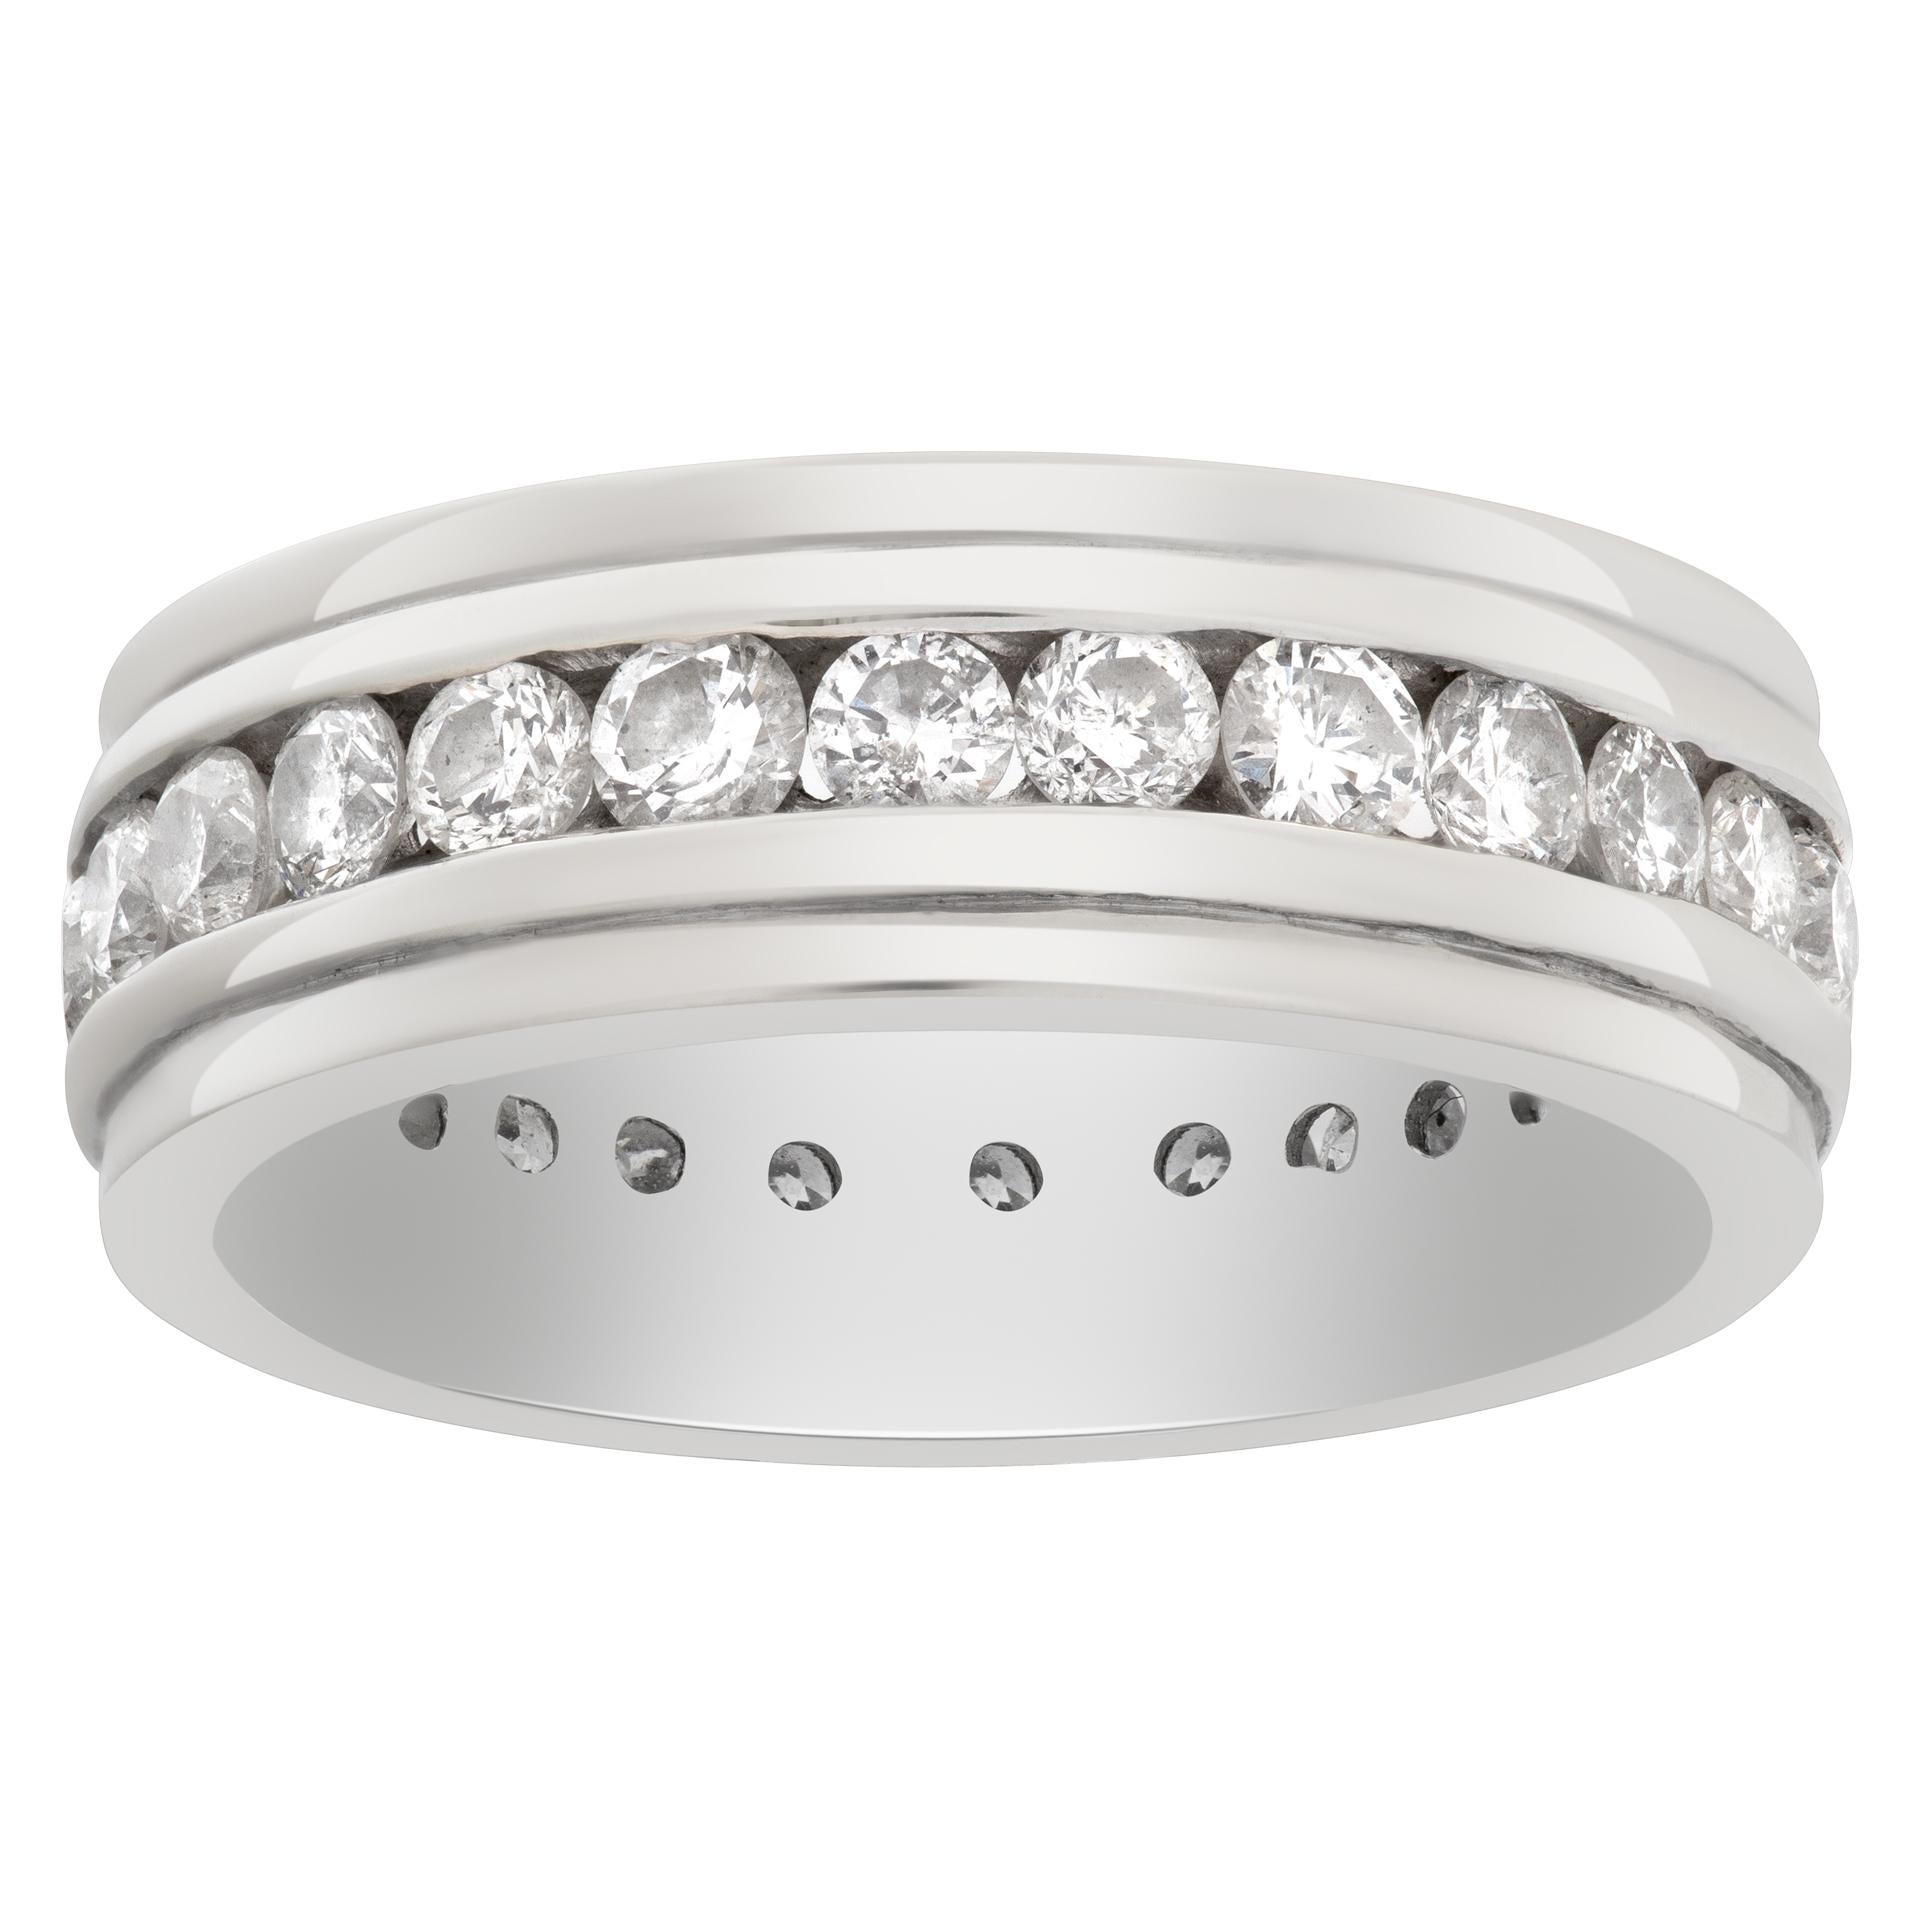 Diamond eternity band in 14k white gold with approx. 1 carat in G-H color, VS clarity diamonds. Size 7.25